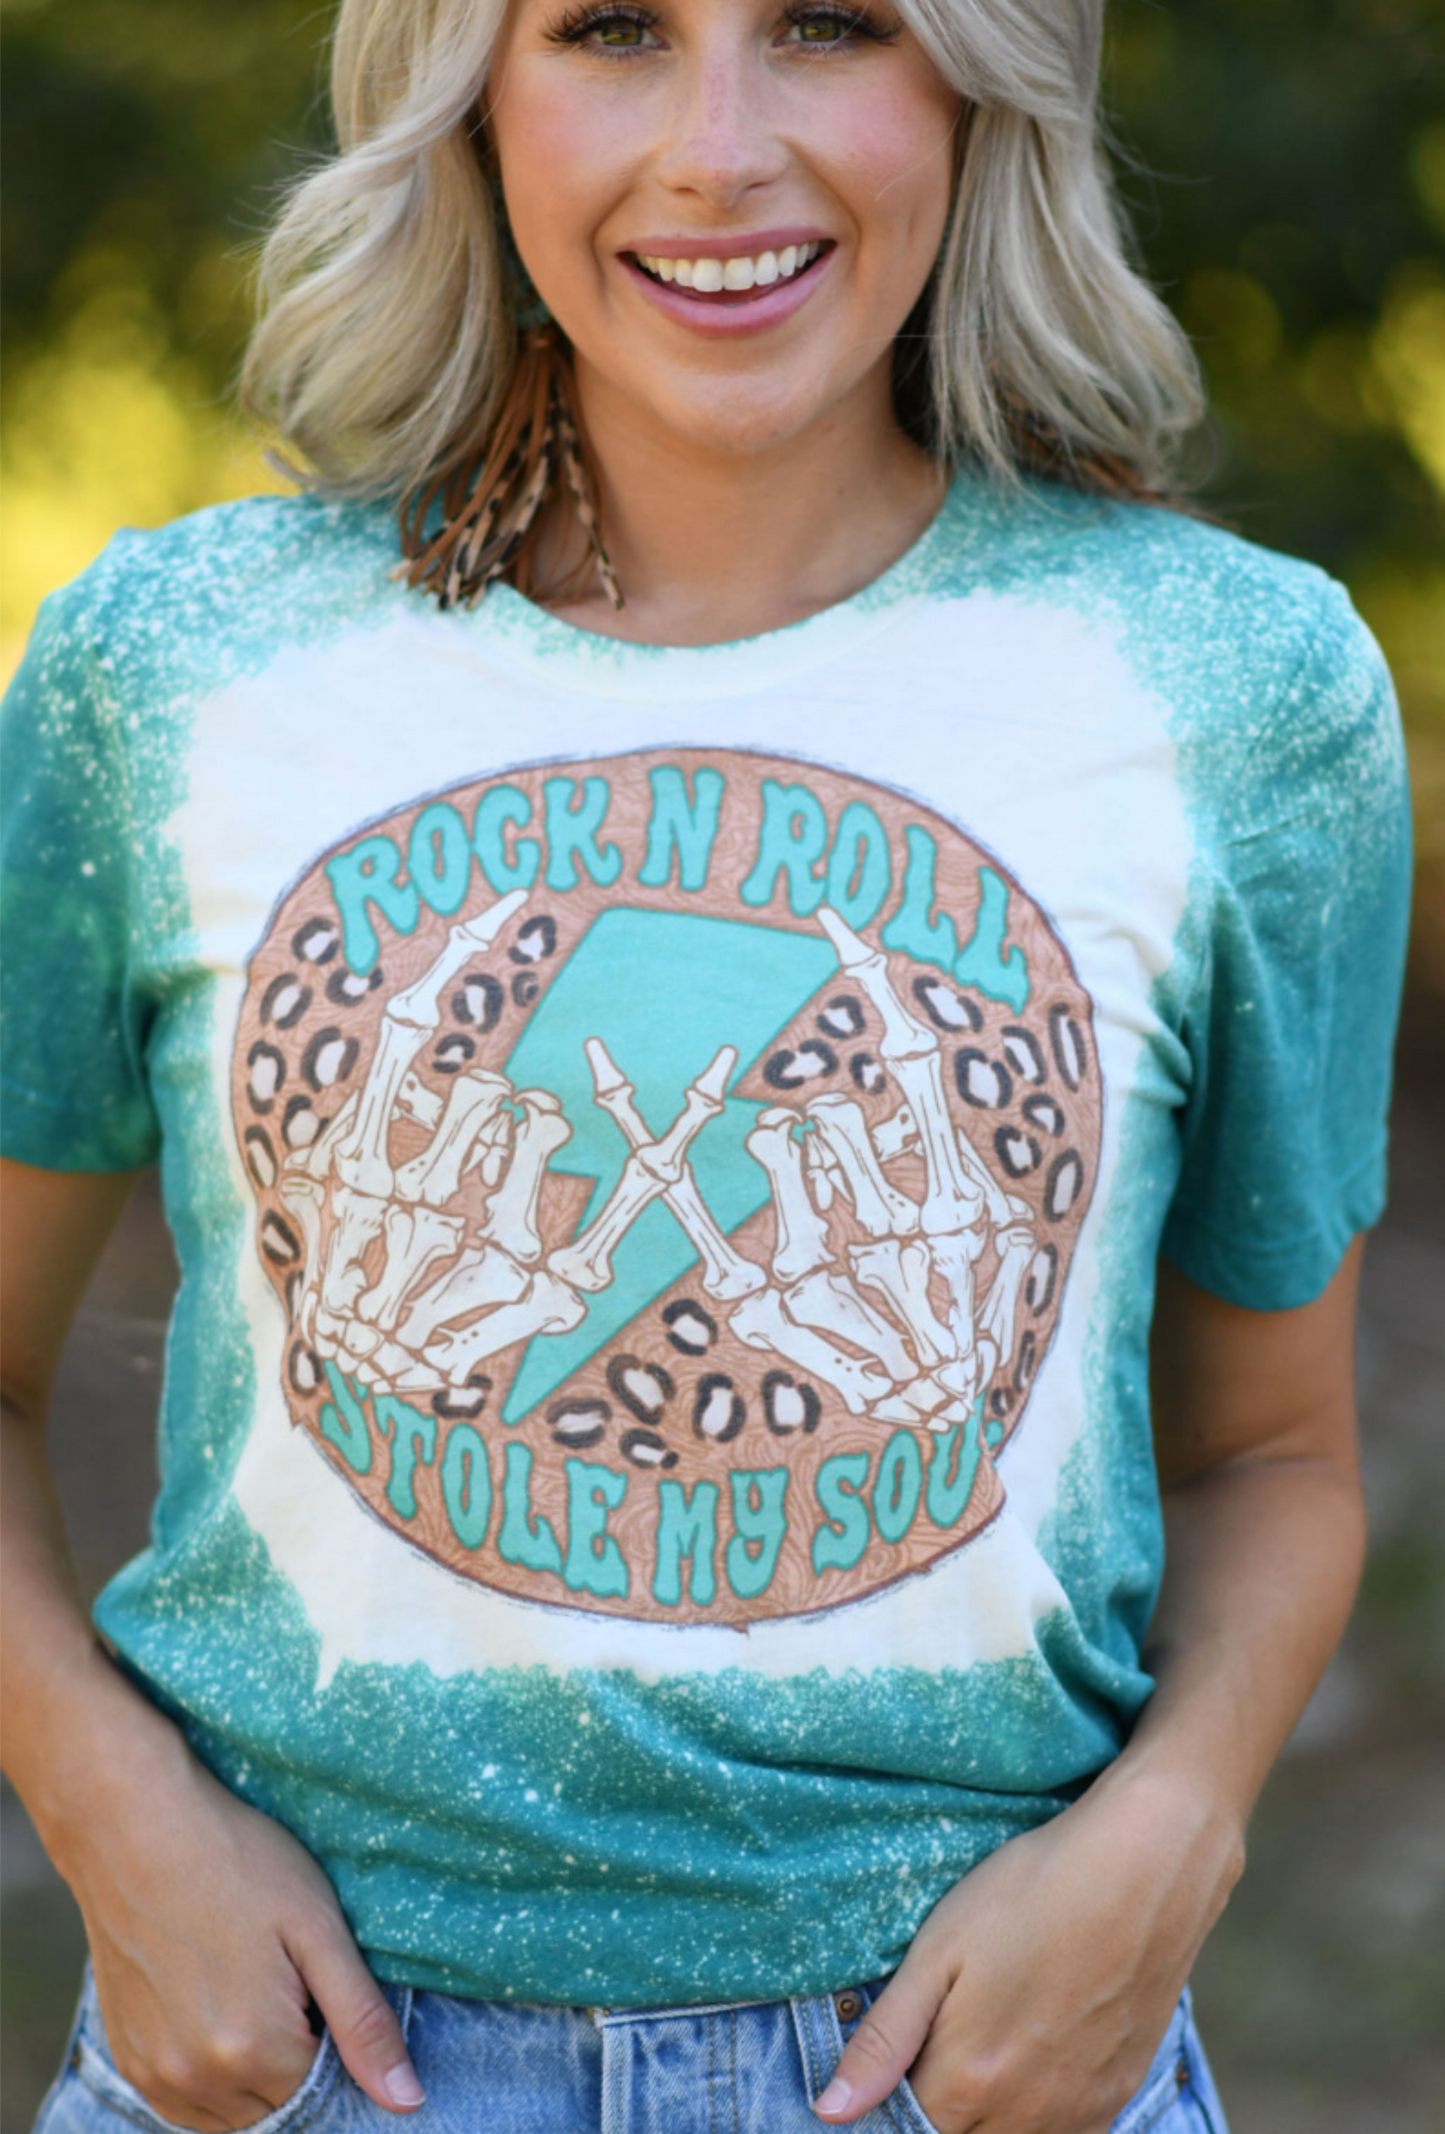 Rock n Roll Stole My Heart Teal Bleached